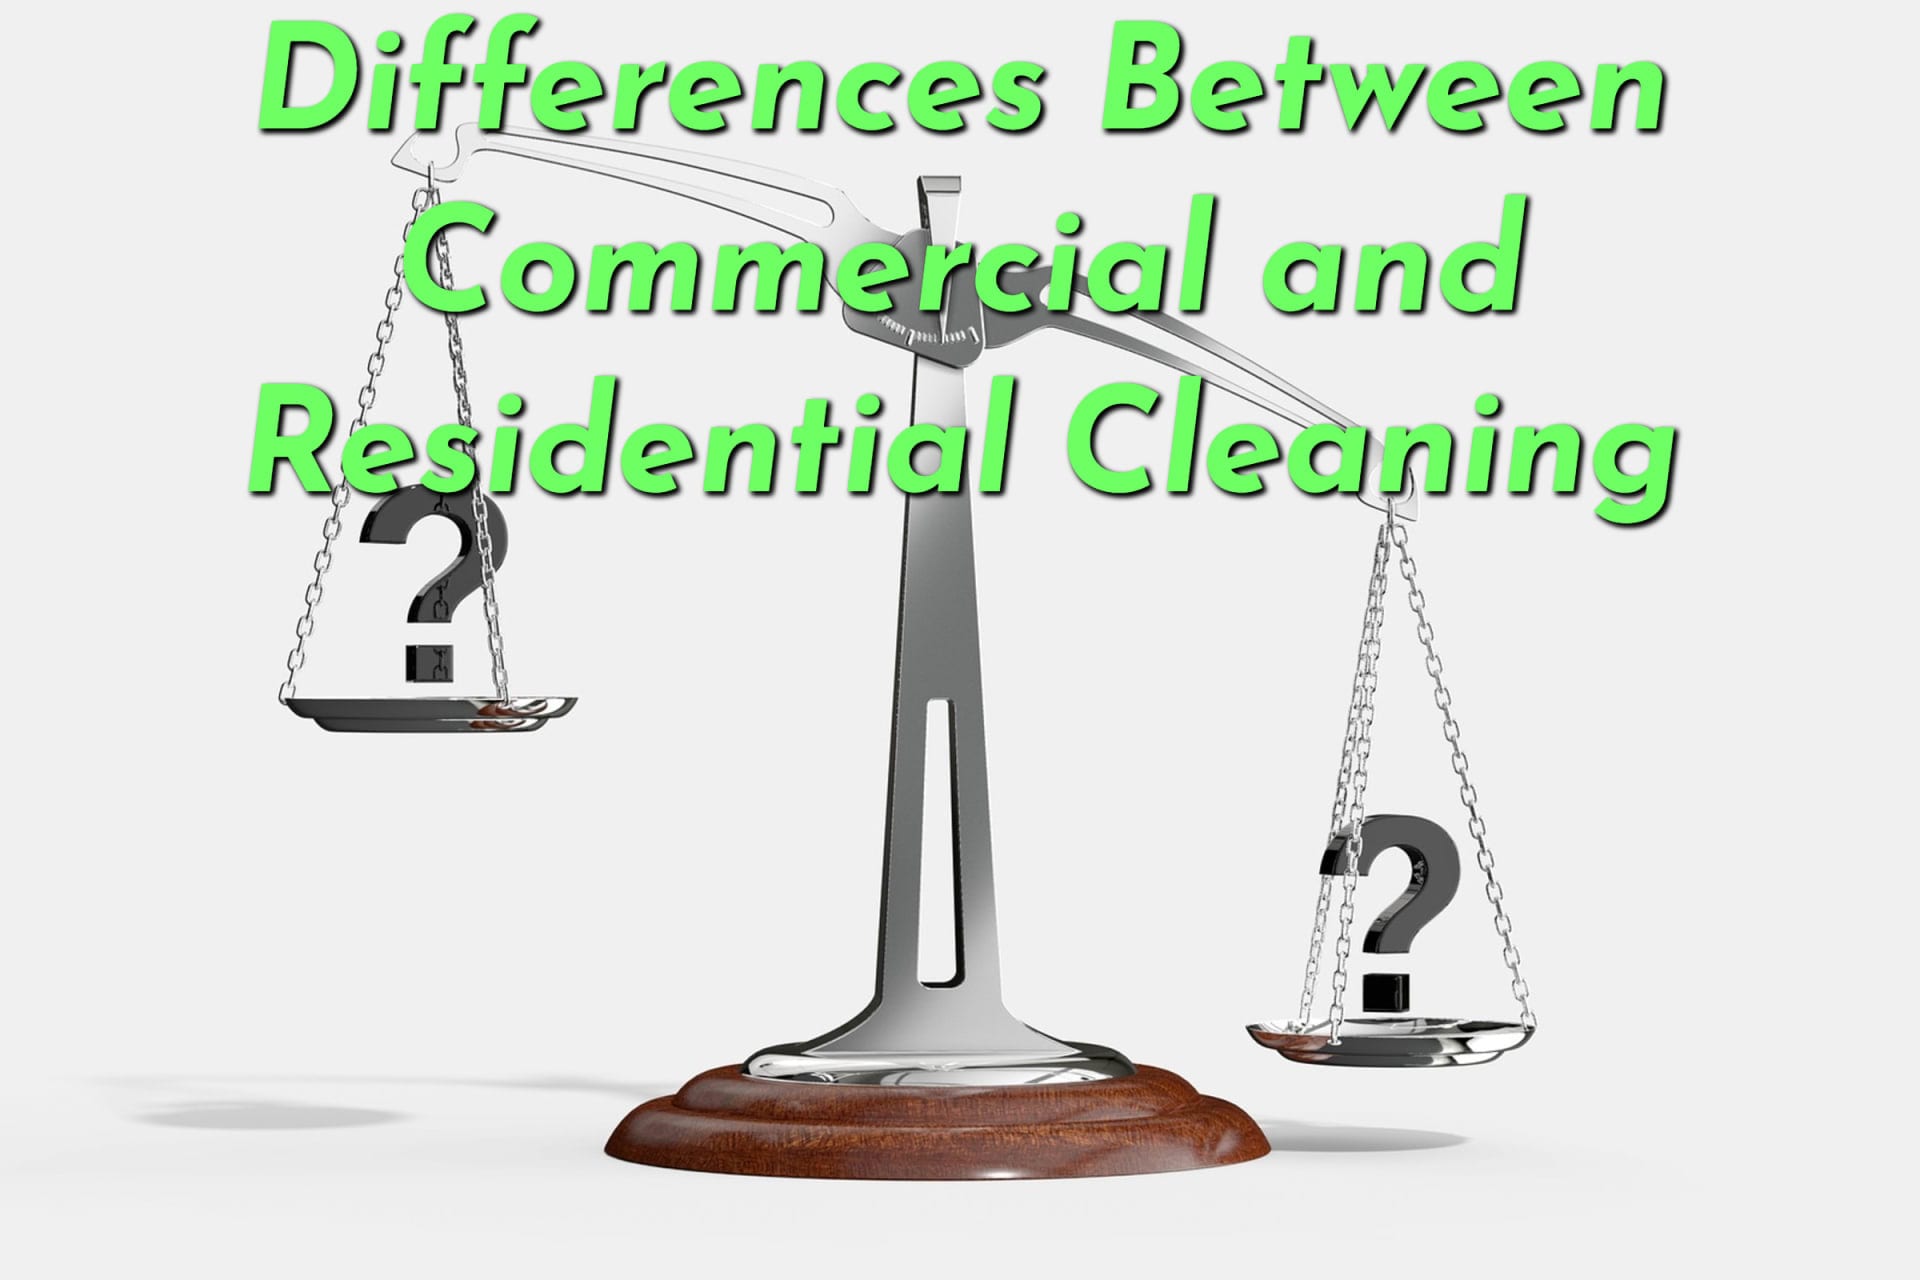 A scale weighing the differences between commercial and residential cleaning